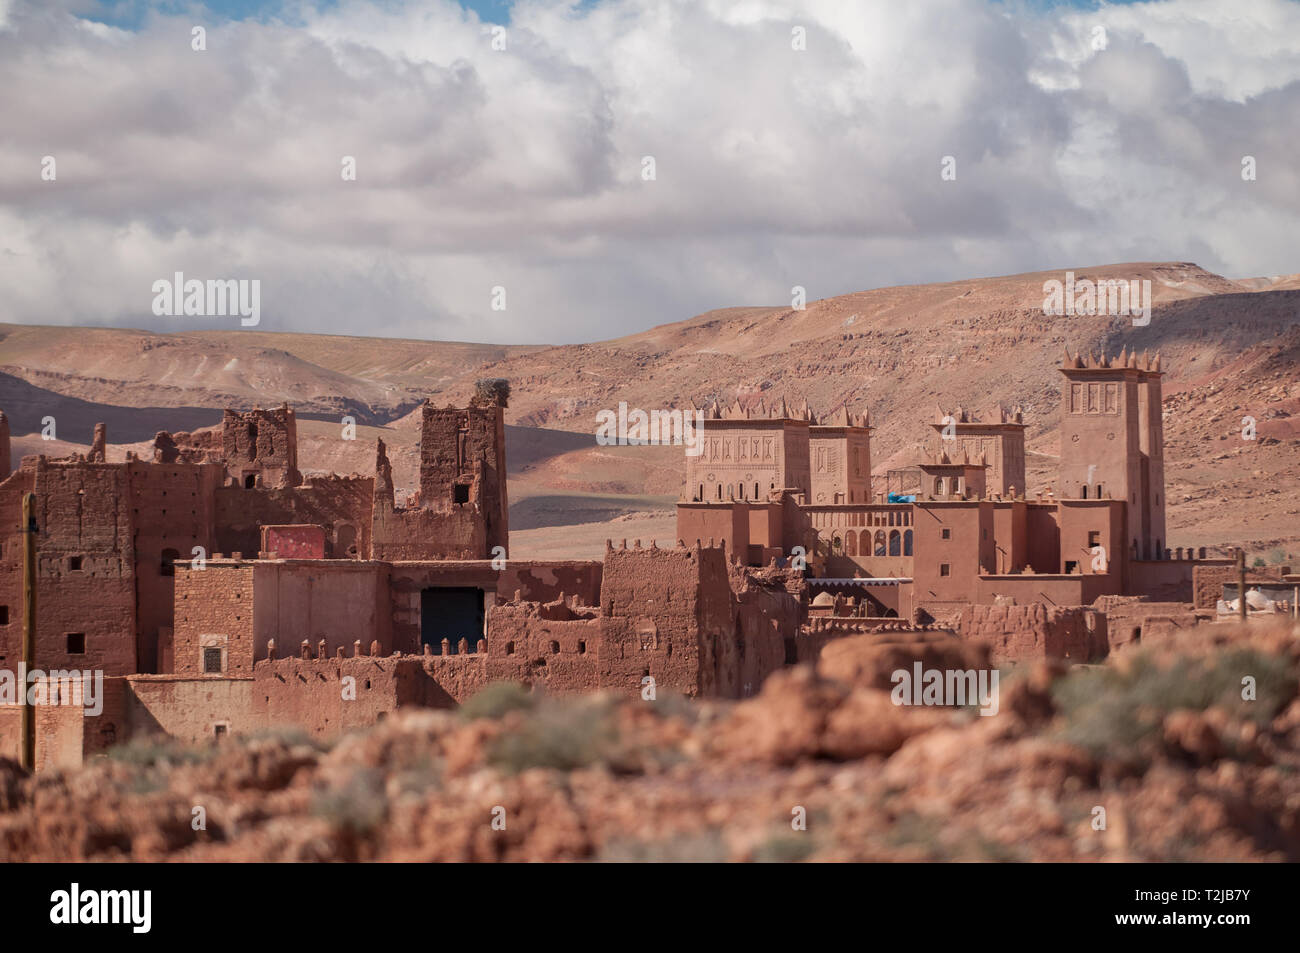 Old Kasbah village in Morocco with Atlas mountains in the background Stock Photo